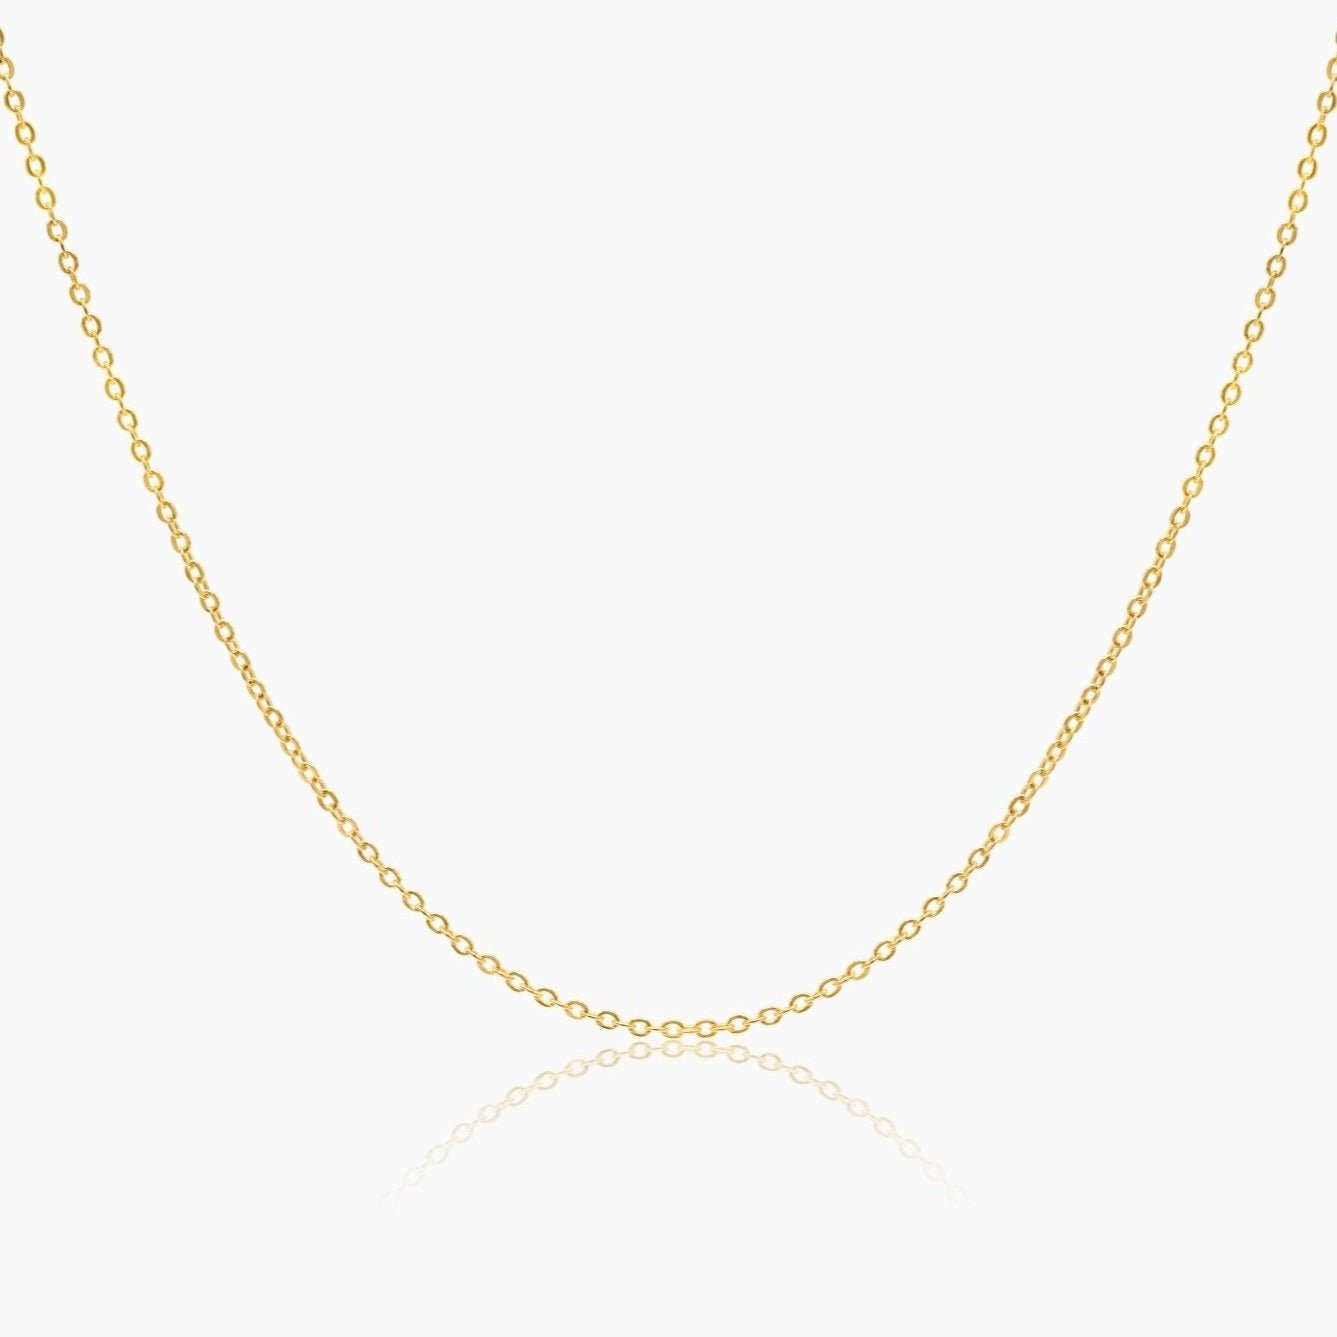 14K Gold Cable Chain Necklace - GoldandWillow